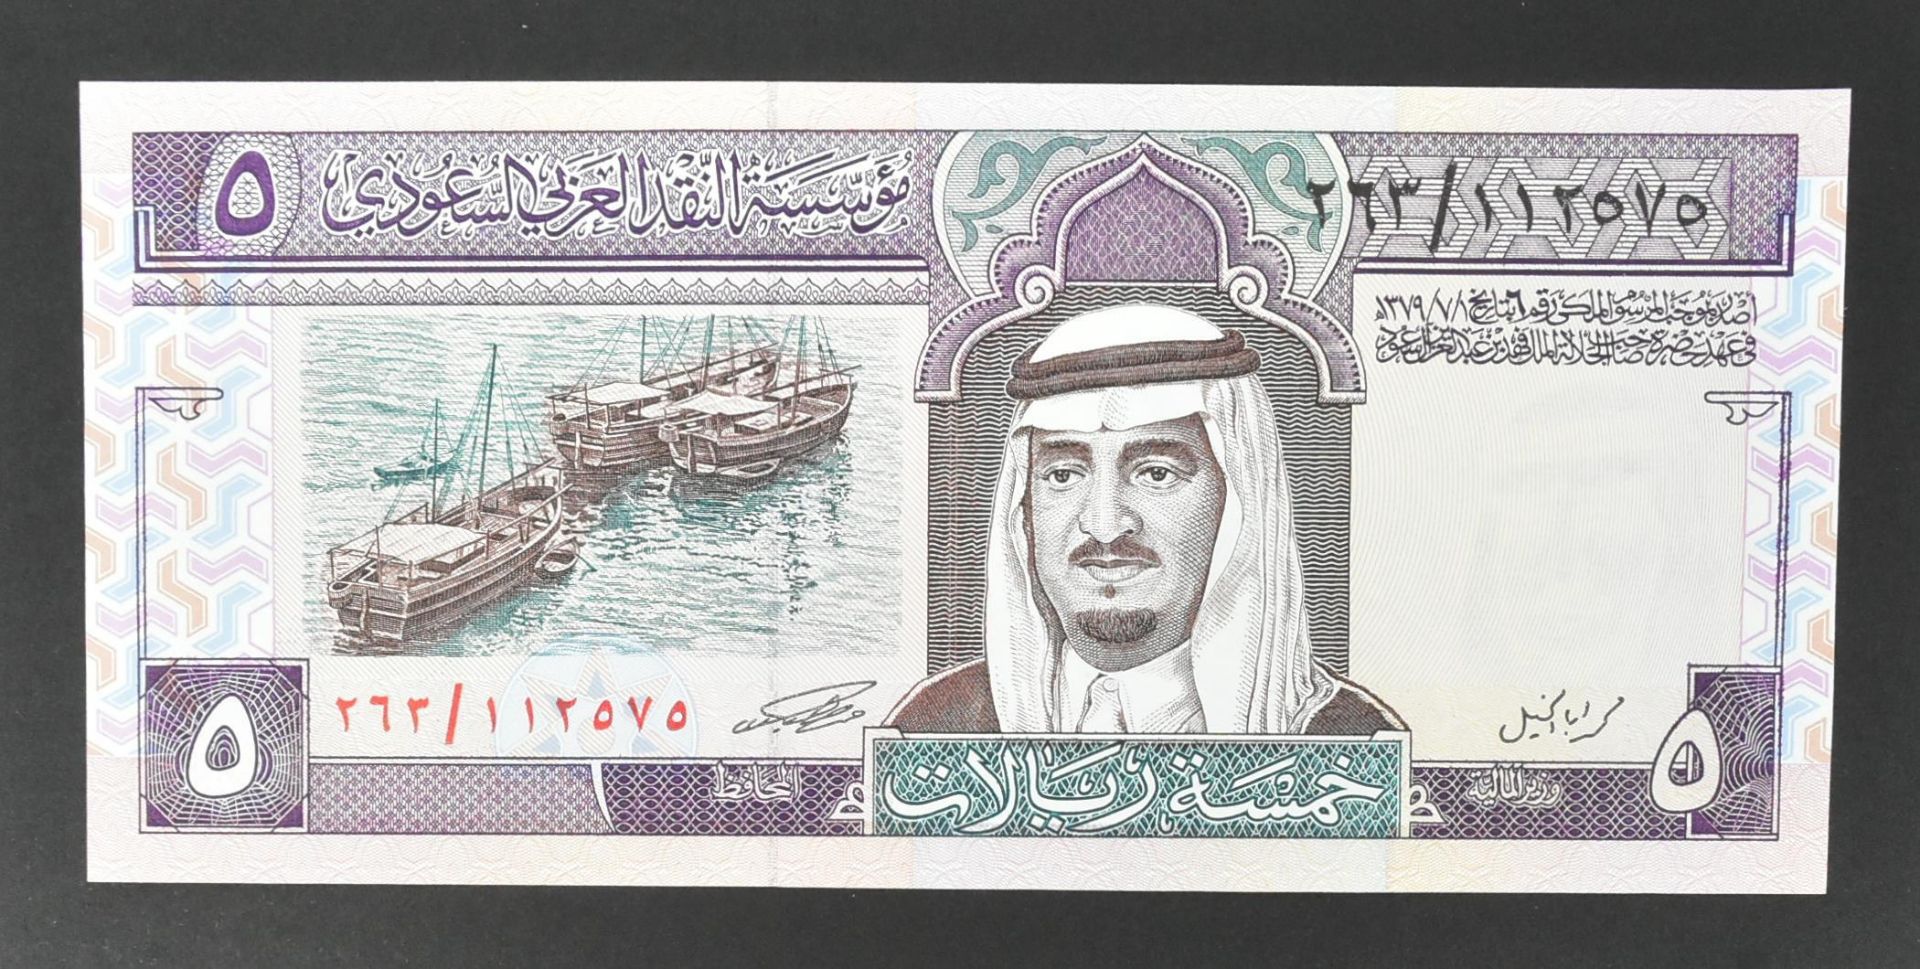 COLLECTION OF INTERNATIONAL UNCIRCULATED BANK NOTES - OMAN - Image 23 of 51